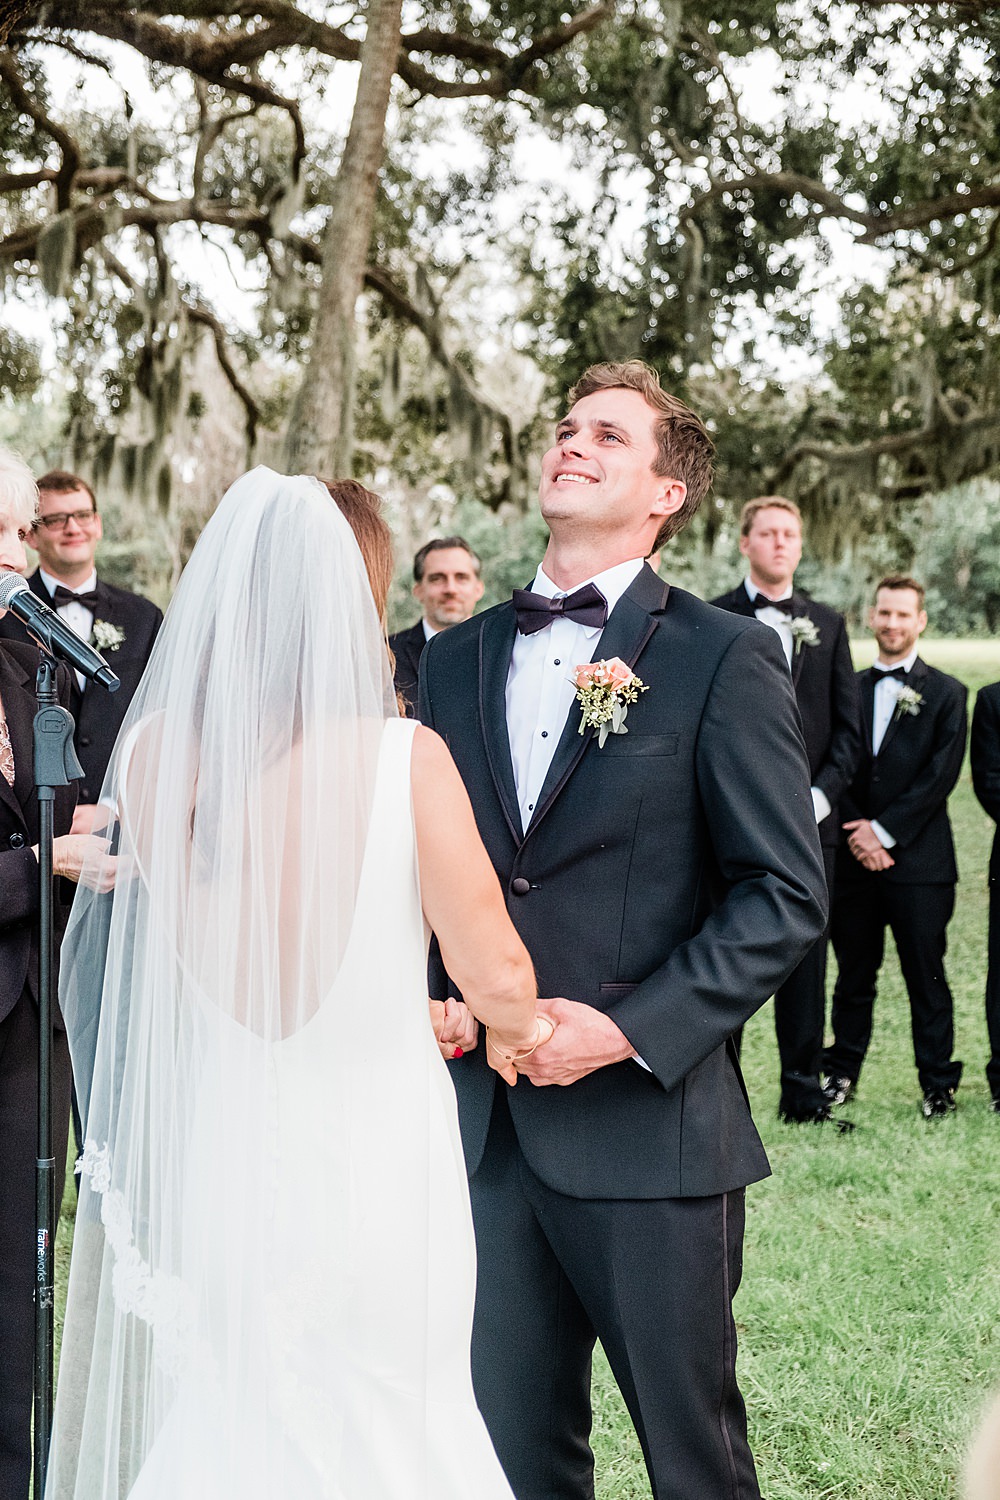 Groom holds back tears while giving his vows to bride at wedding ceremony